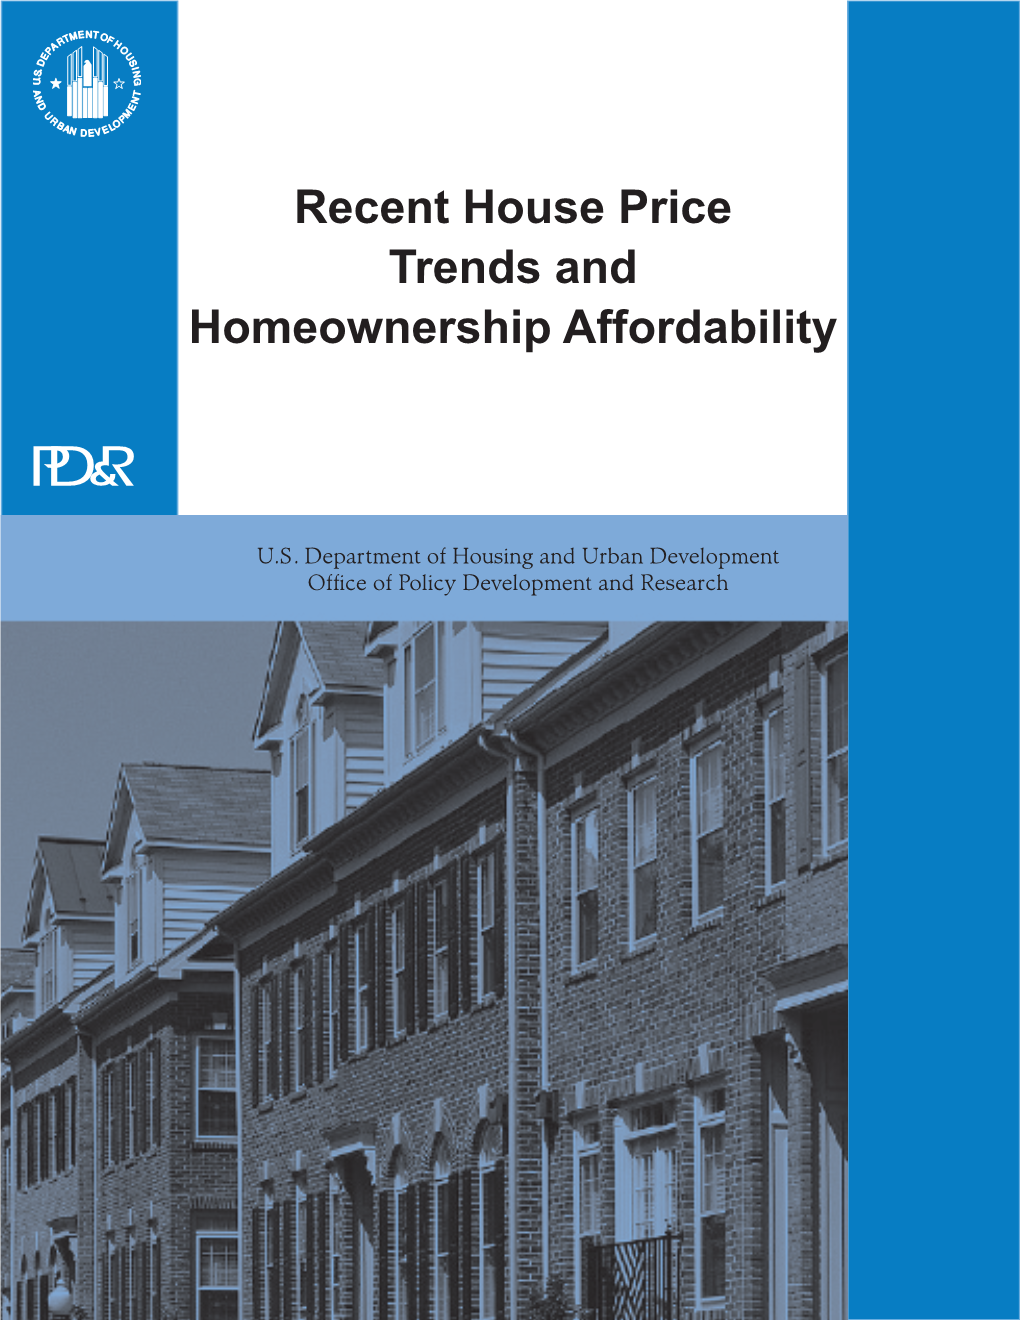 Recent House Price Trends and Homeownership Affordability